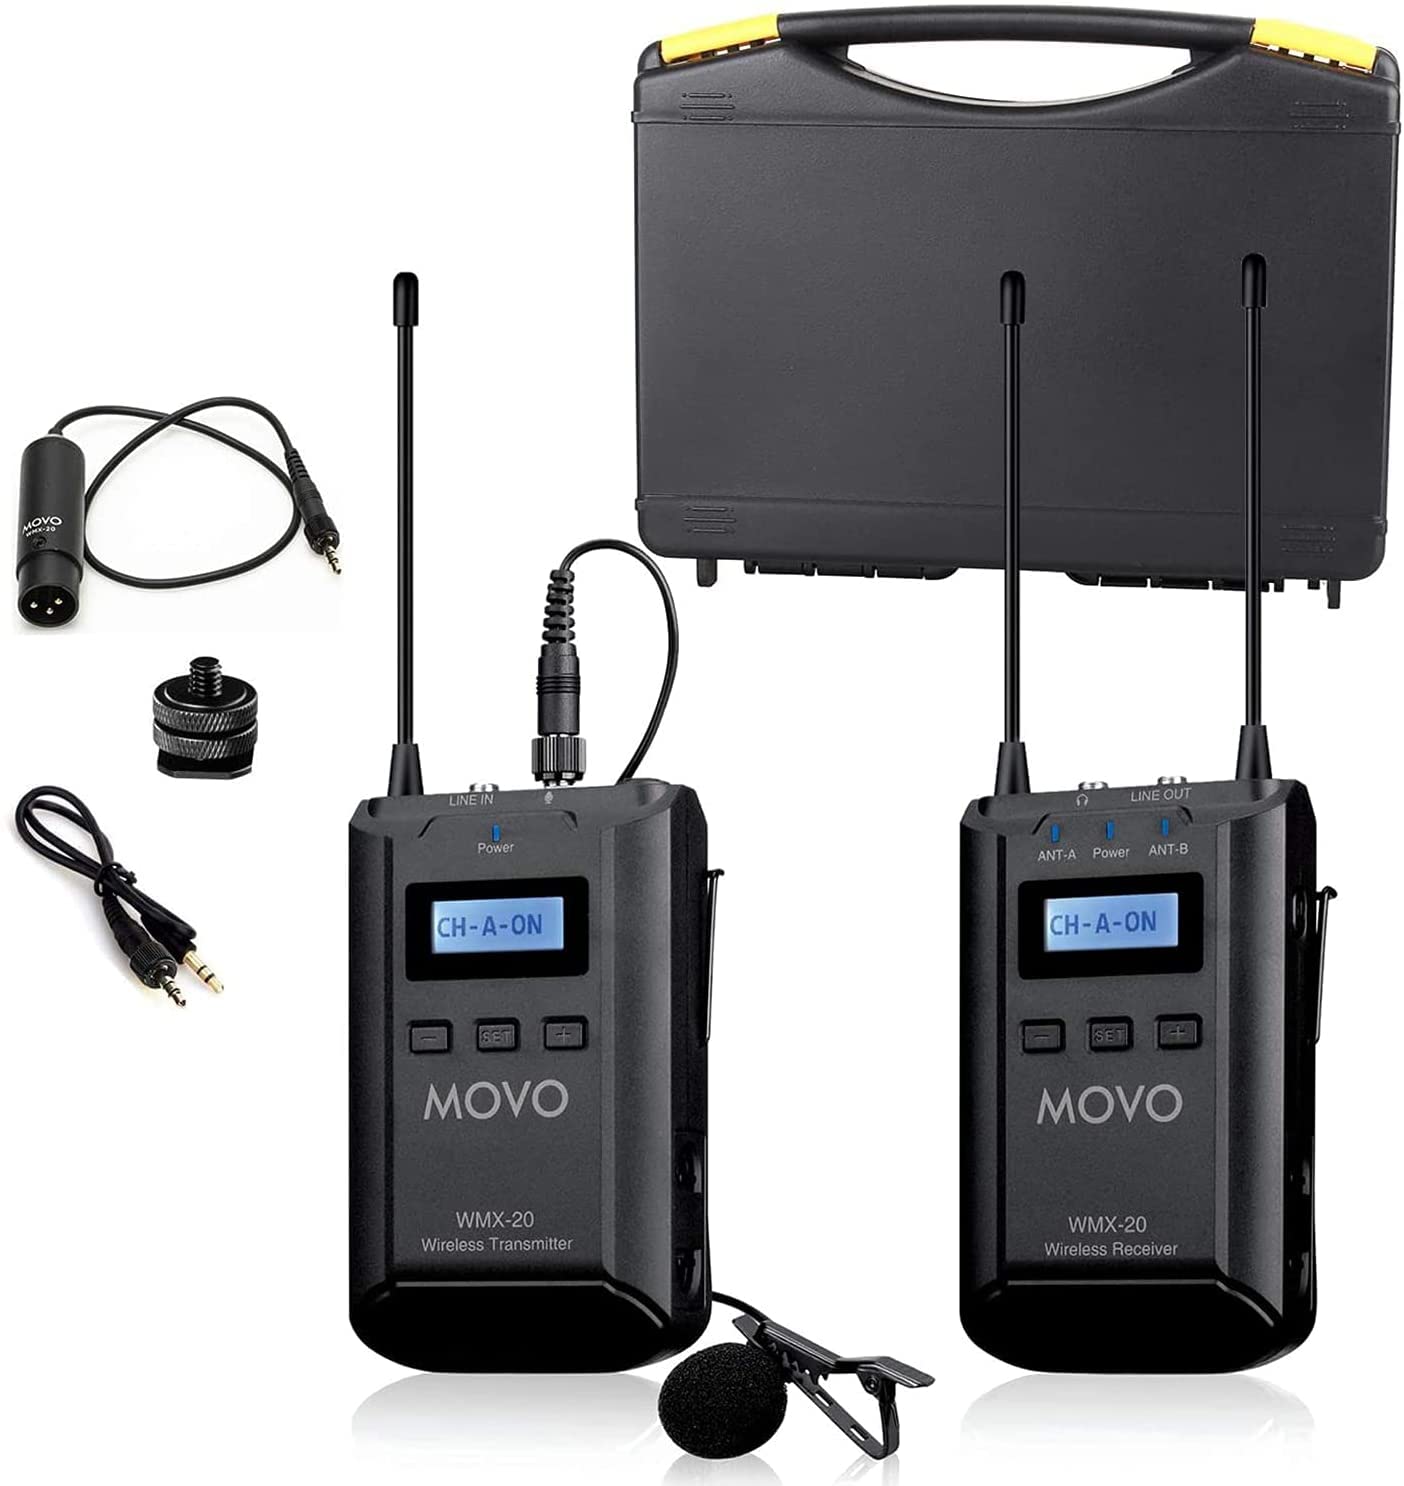 Movo WMX-20 48-Channel UHF Wireless Lavalier Microphone System with 1 Receiver, 1 Transmitter, and 1 Lapel Microphone Compatible with DSLR Cameras (330' ft Audio Range)  - Very Good